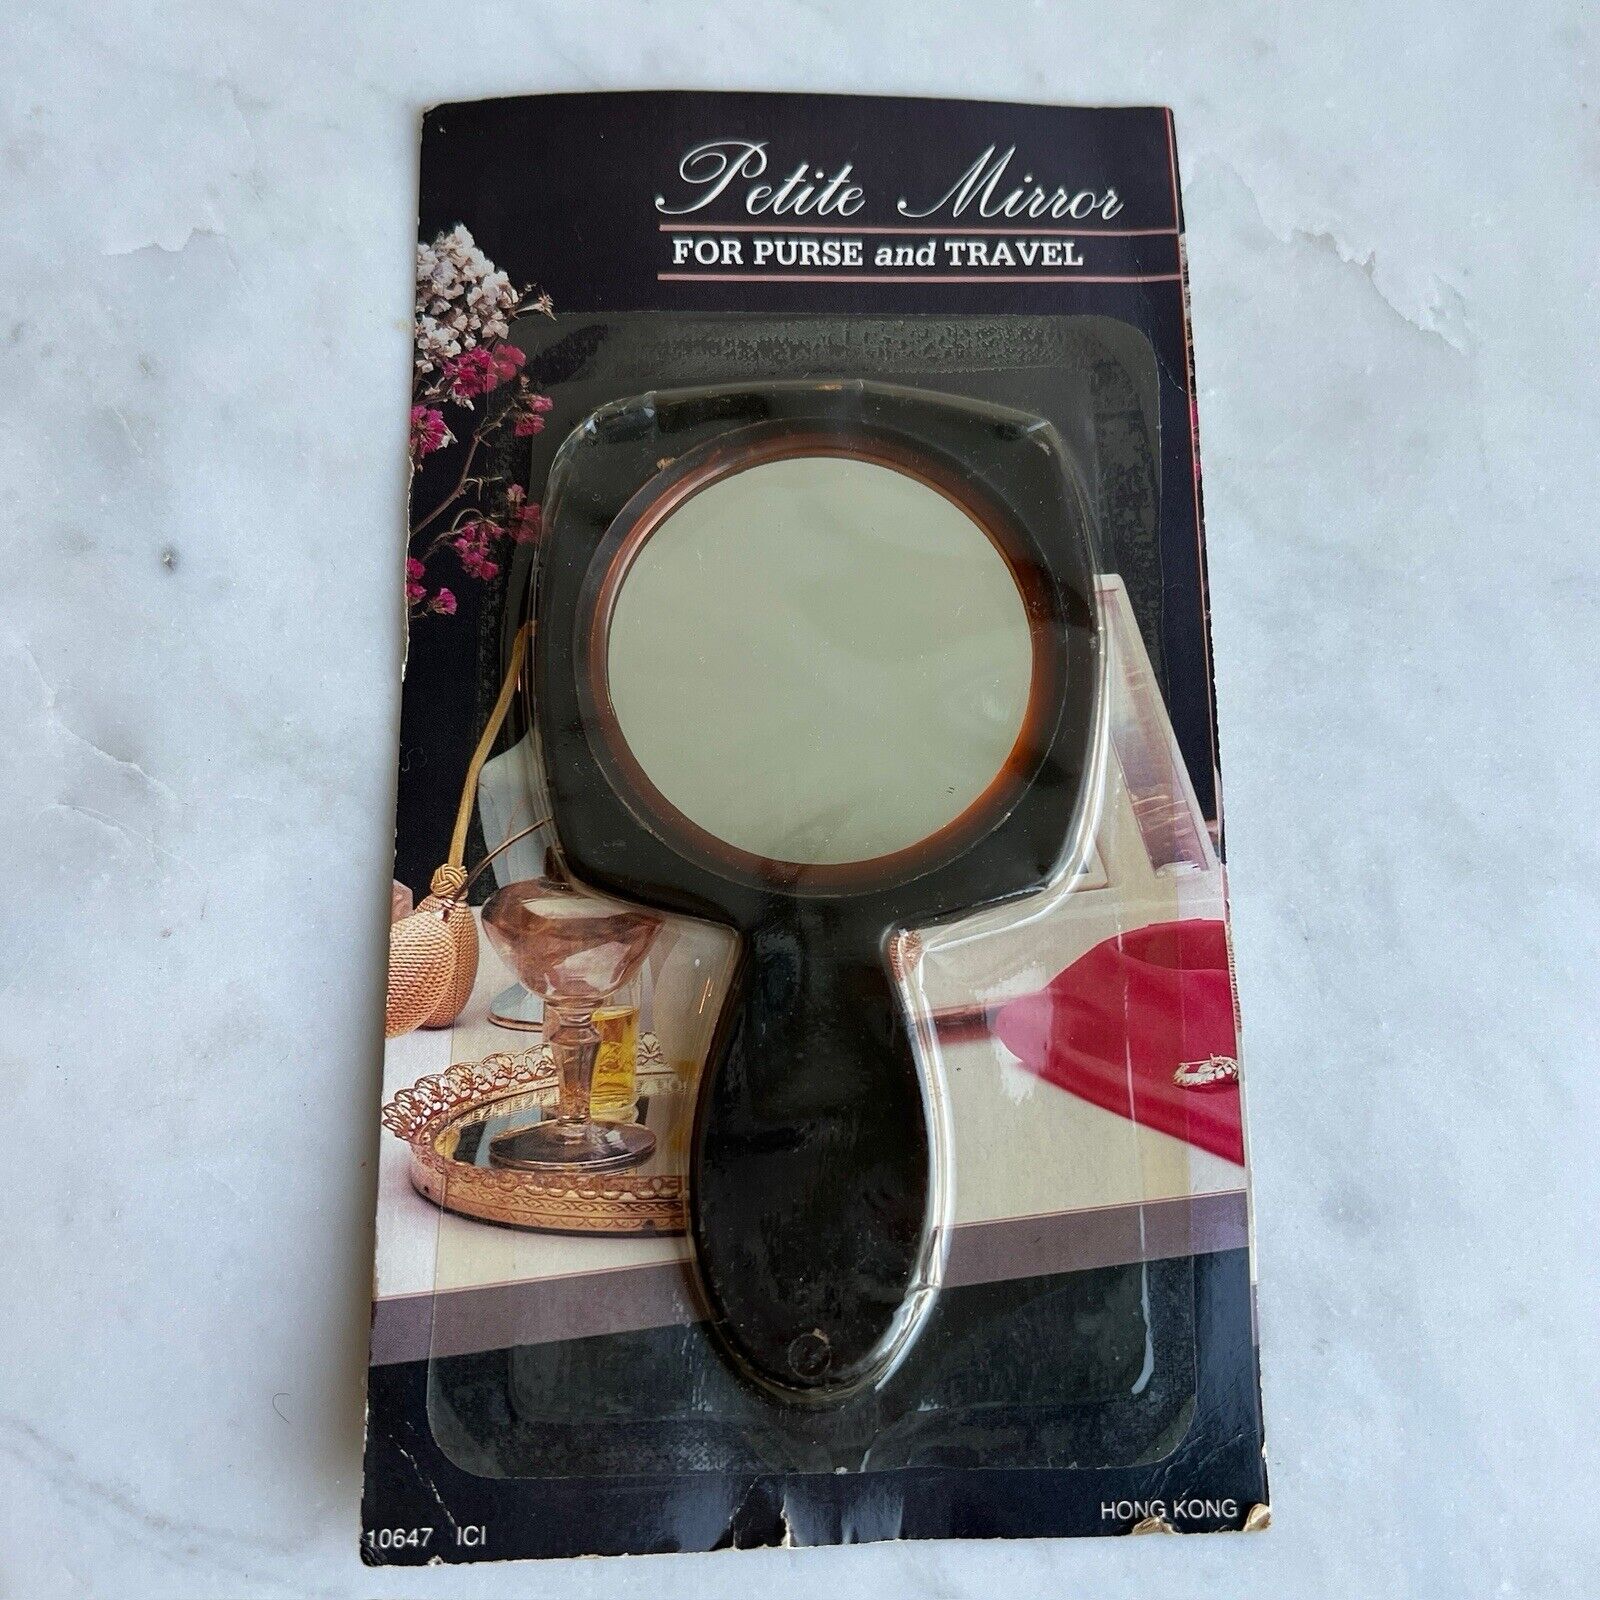 Vintage Petite Mirror for Purse and Travel Hand Held New in Package